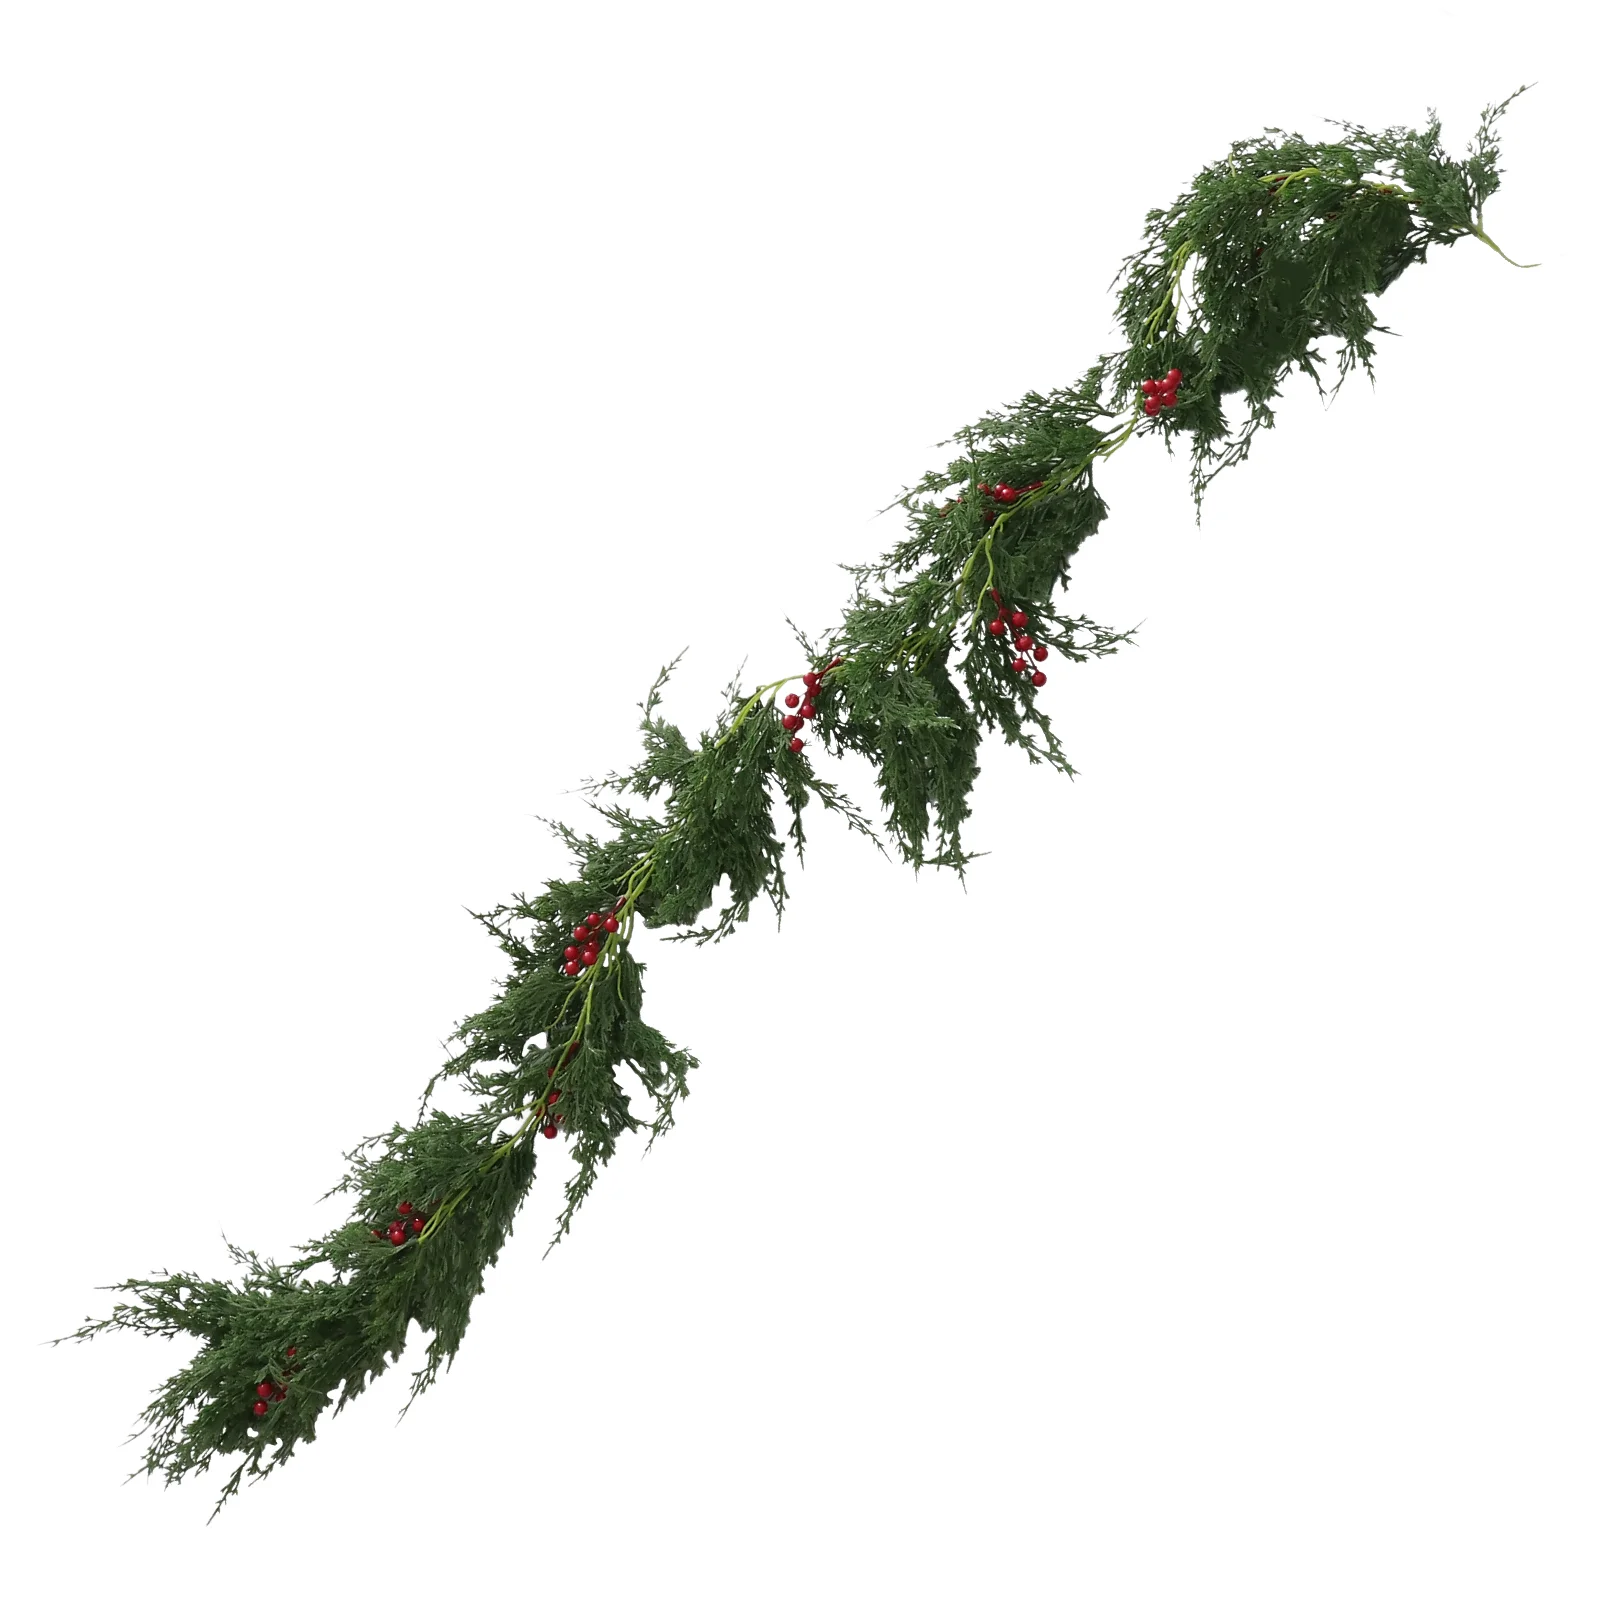 

Garland Christmas Artificial Berry Rattan Holiday Berries Red Stairs Fireplace Holly Tree Frosted Greenery Flowers Home decor